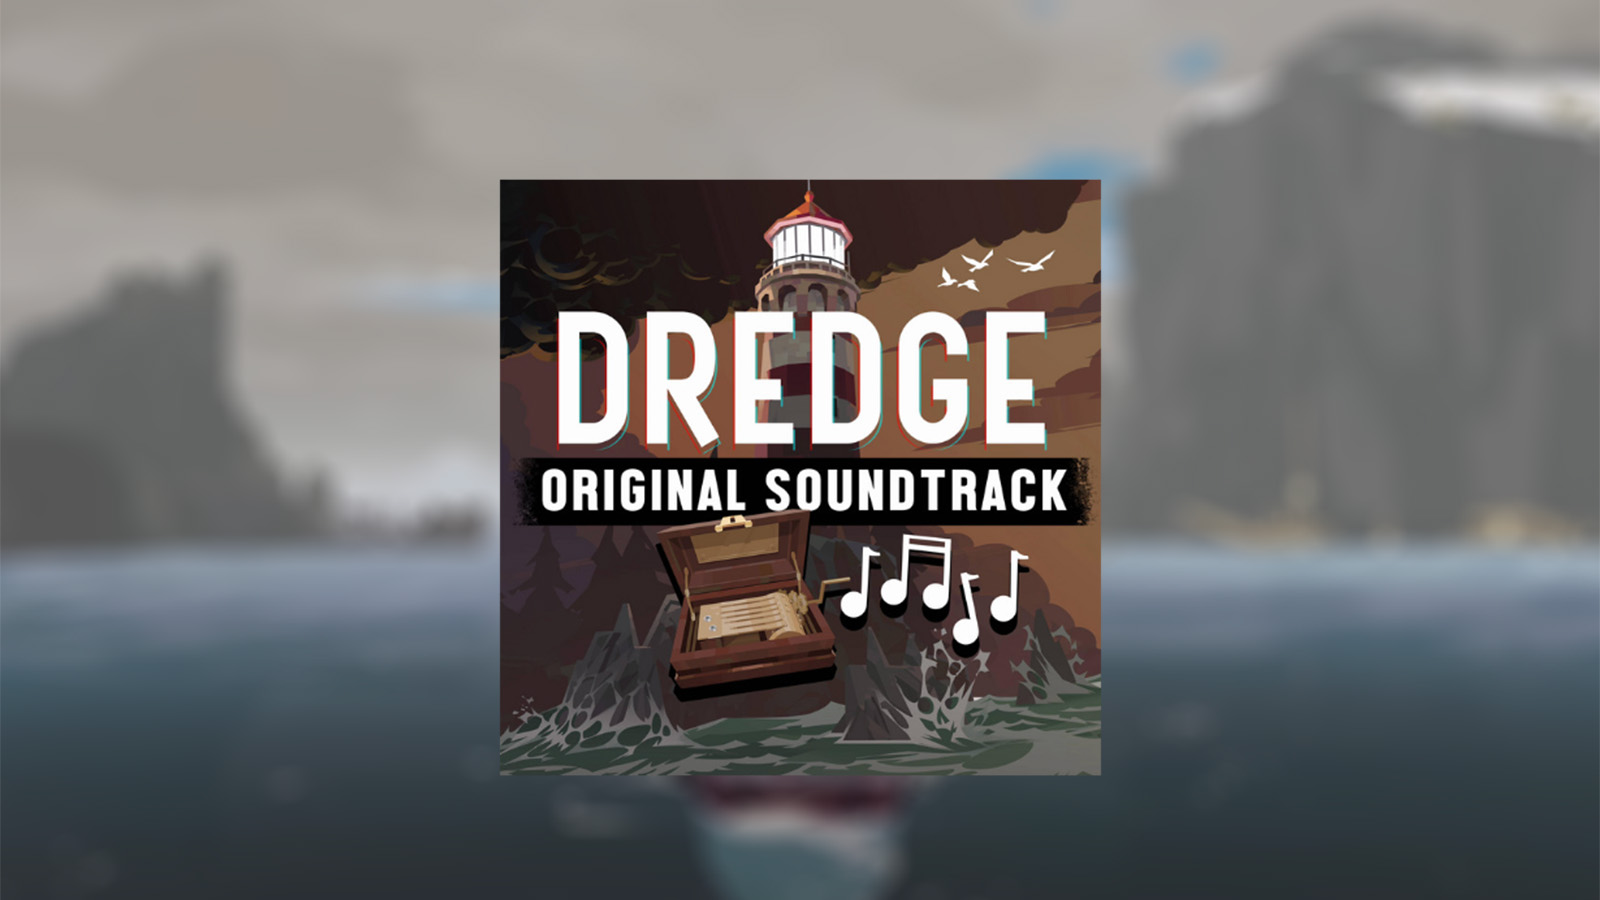 The Dredge Soundtrack Is Available To Stream Now